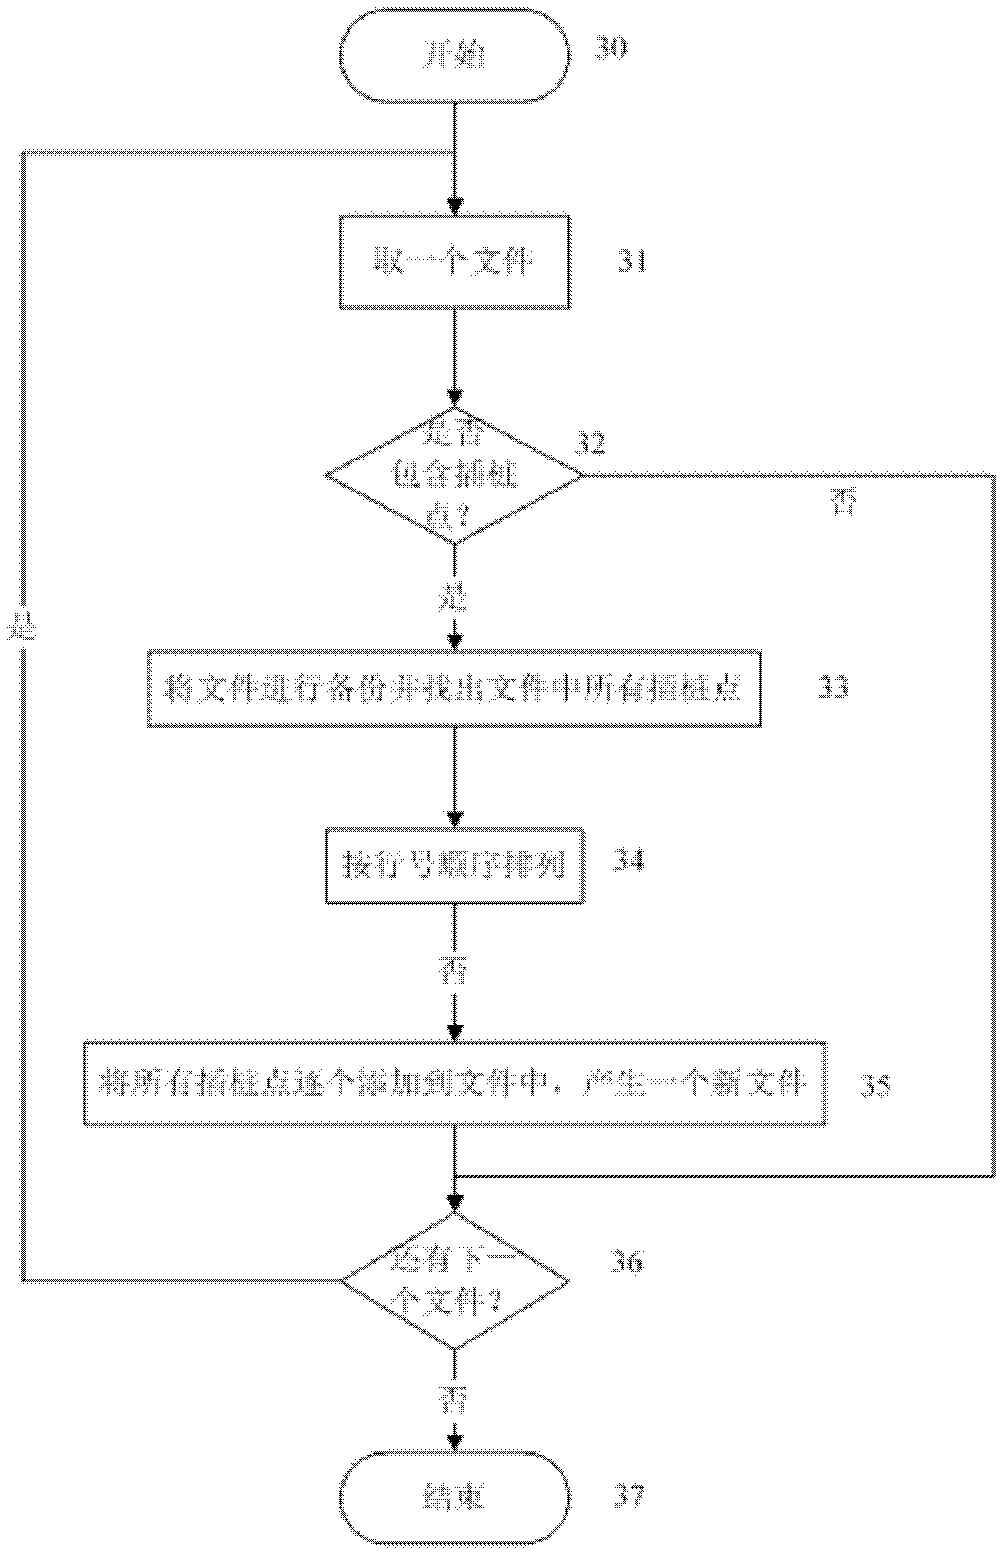 Instrumentation method for traceless manageable source code manually-defined mark